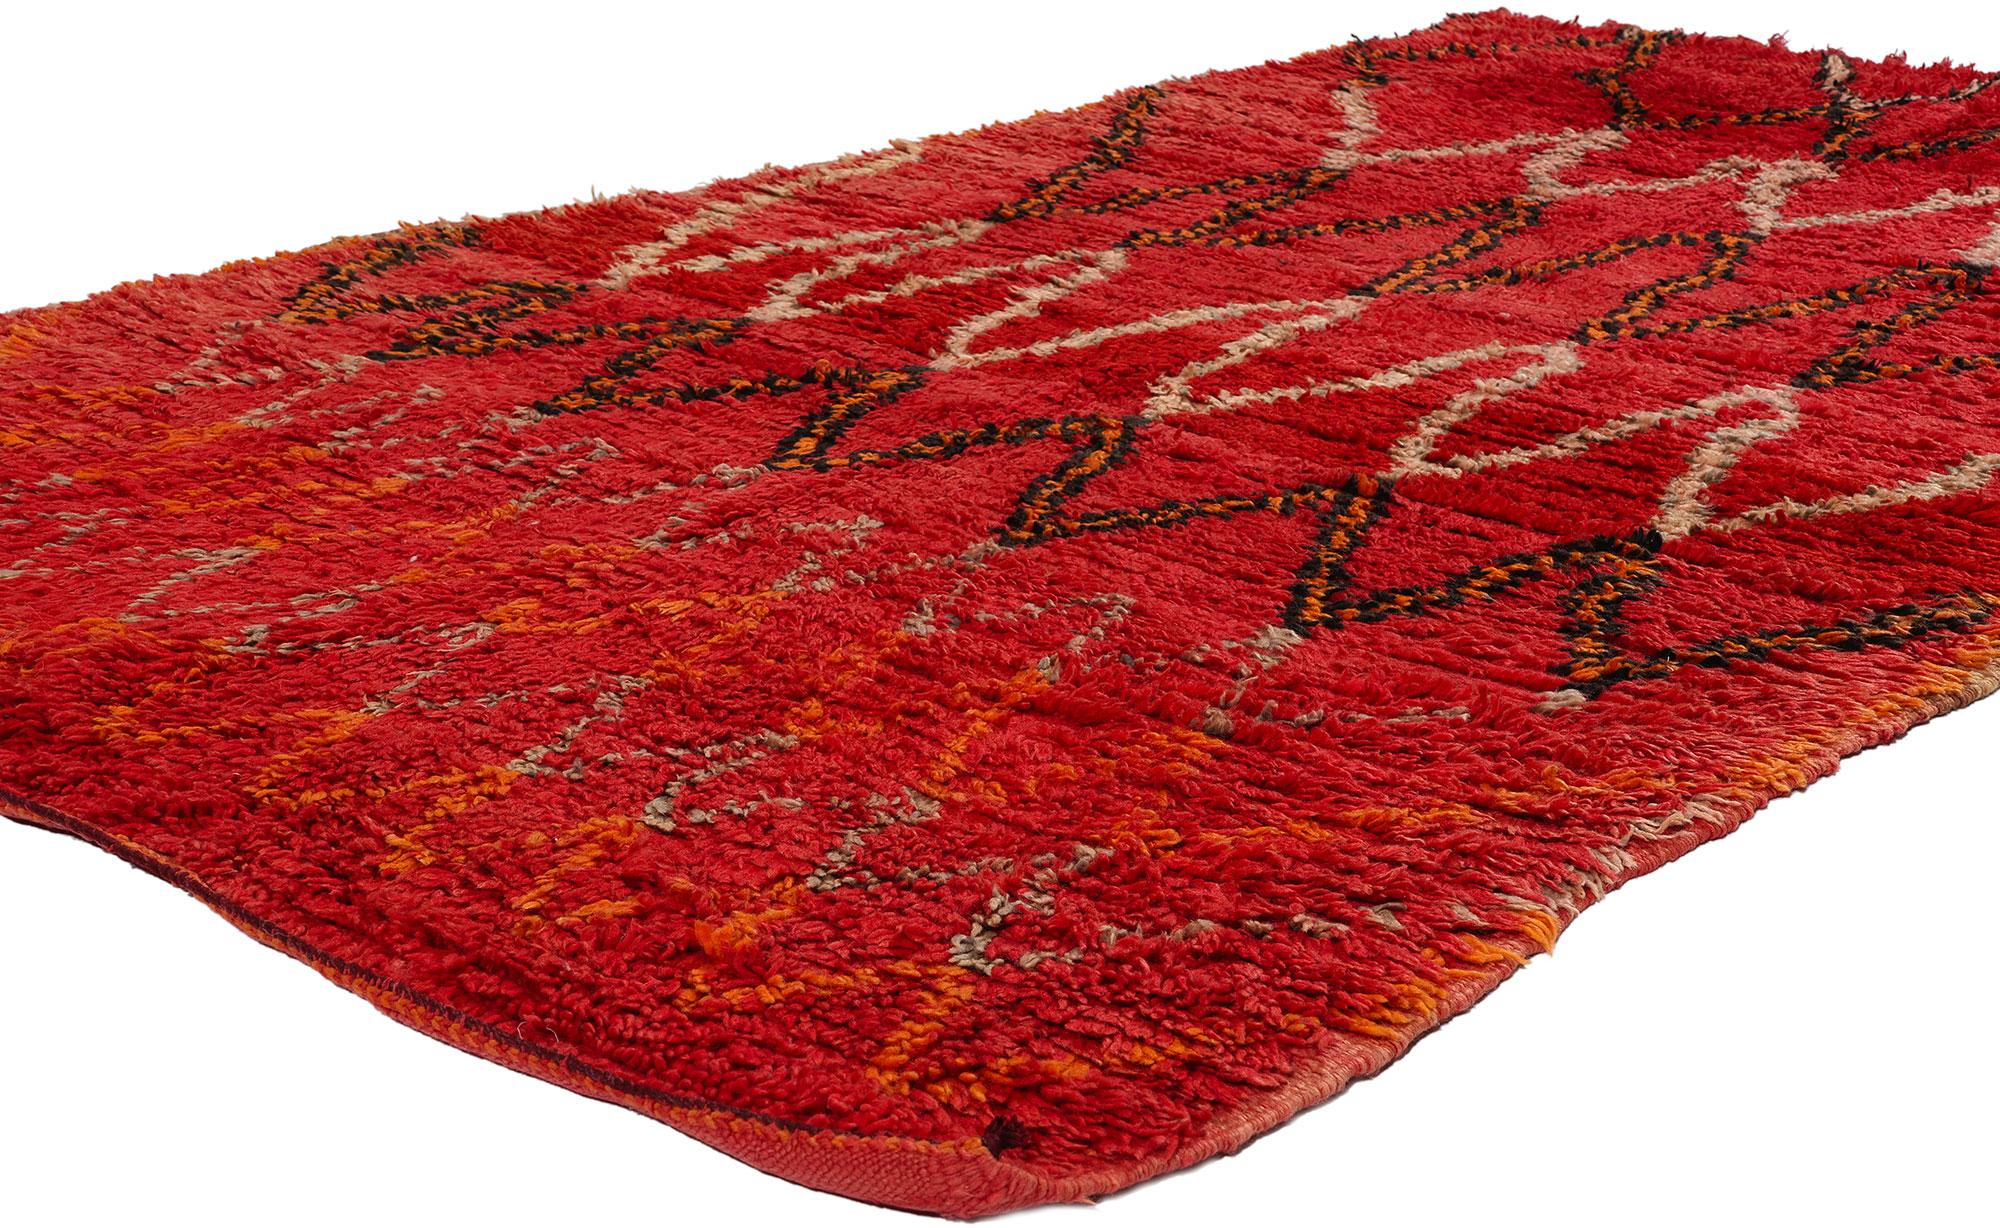 21758 Vintage Red Talsint Moroccan Rug, 04'07 x 07'09. Experience the captivating craftsmanship of this hand knotted wool vintage red Talsint Moroccan rug, hailing from the Figuig region in northeast Morocco, also recognized as Aït Bou Ichaouen.